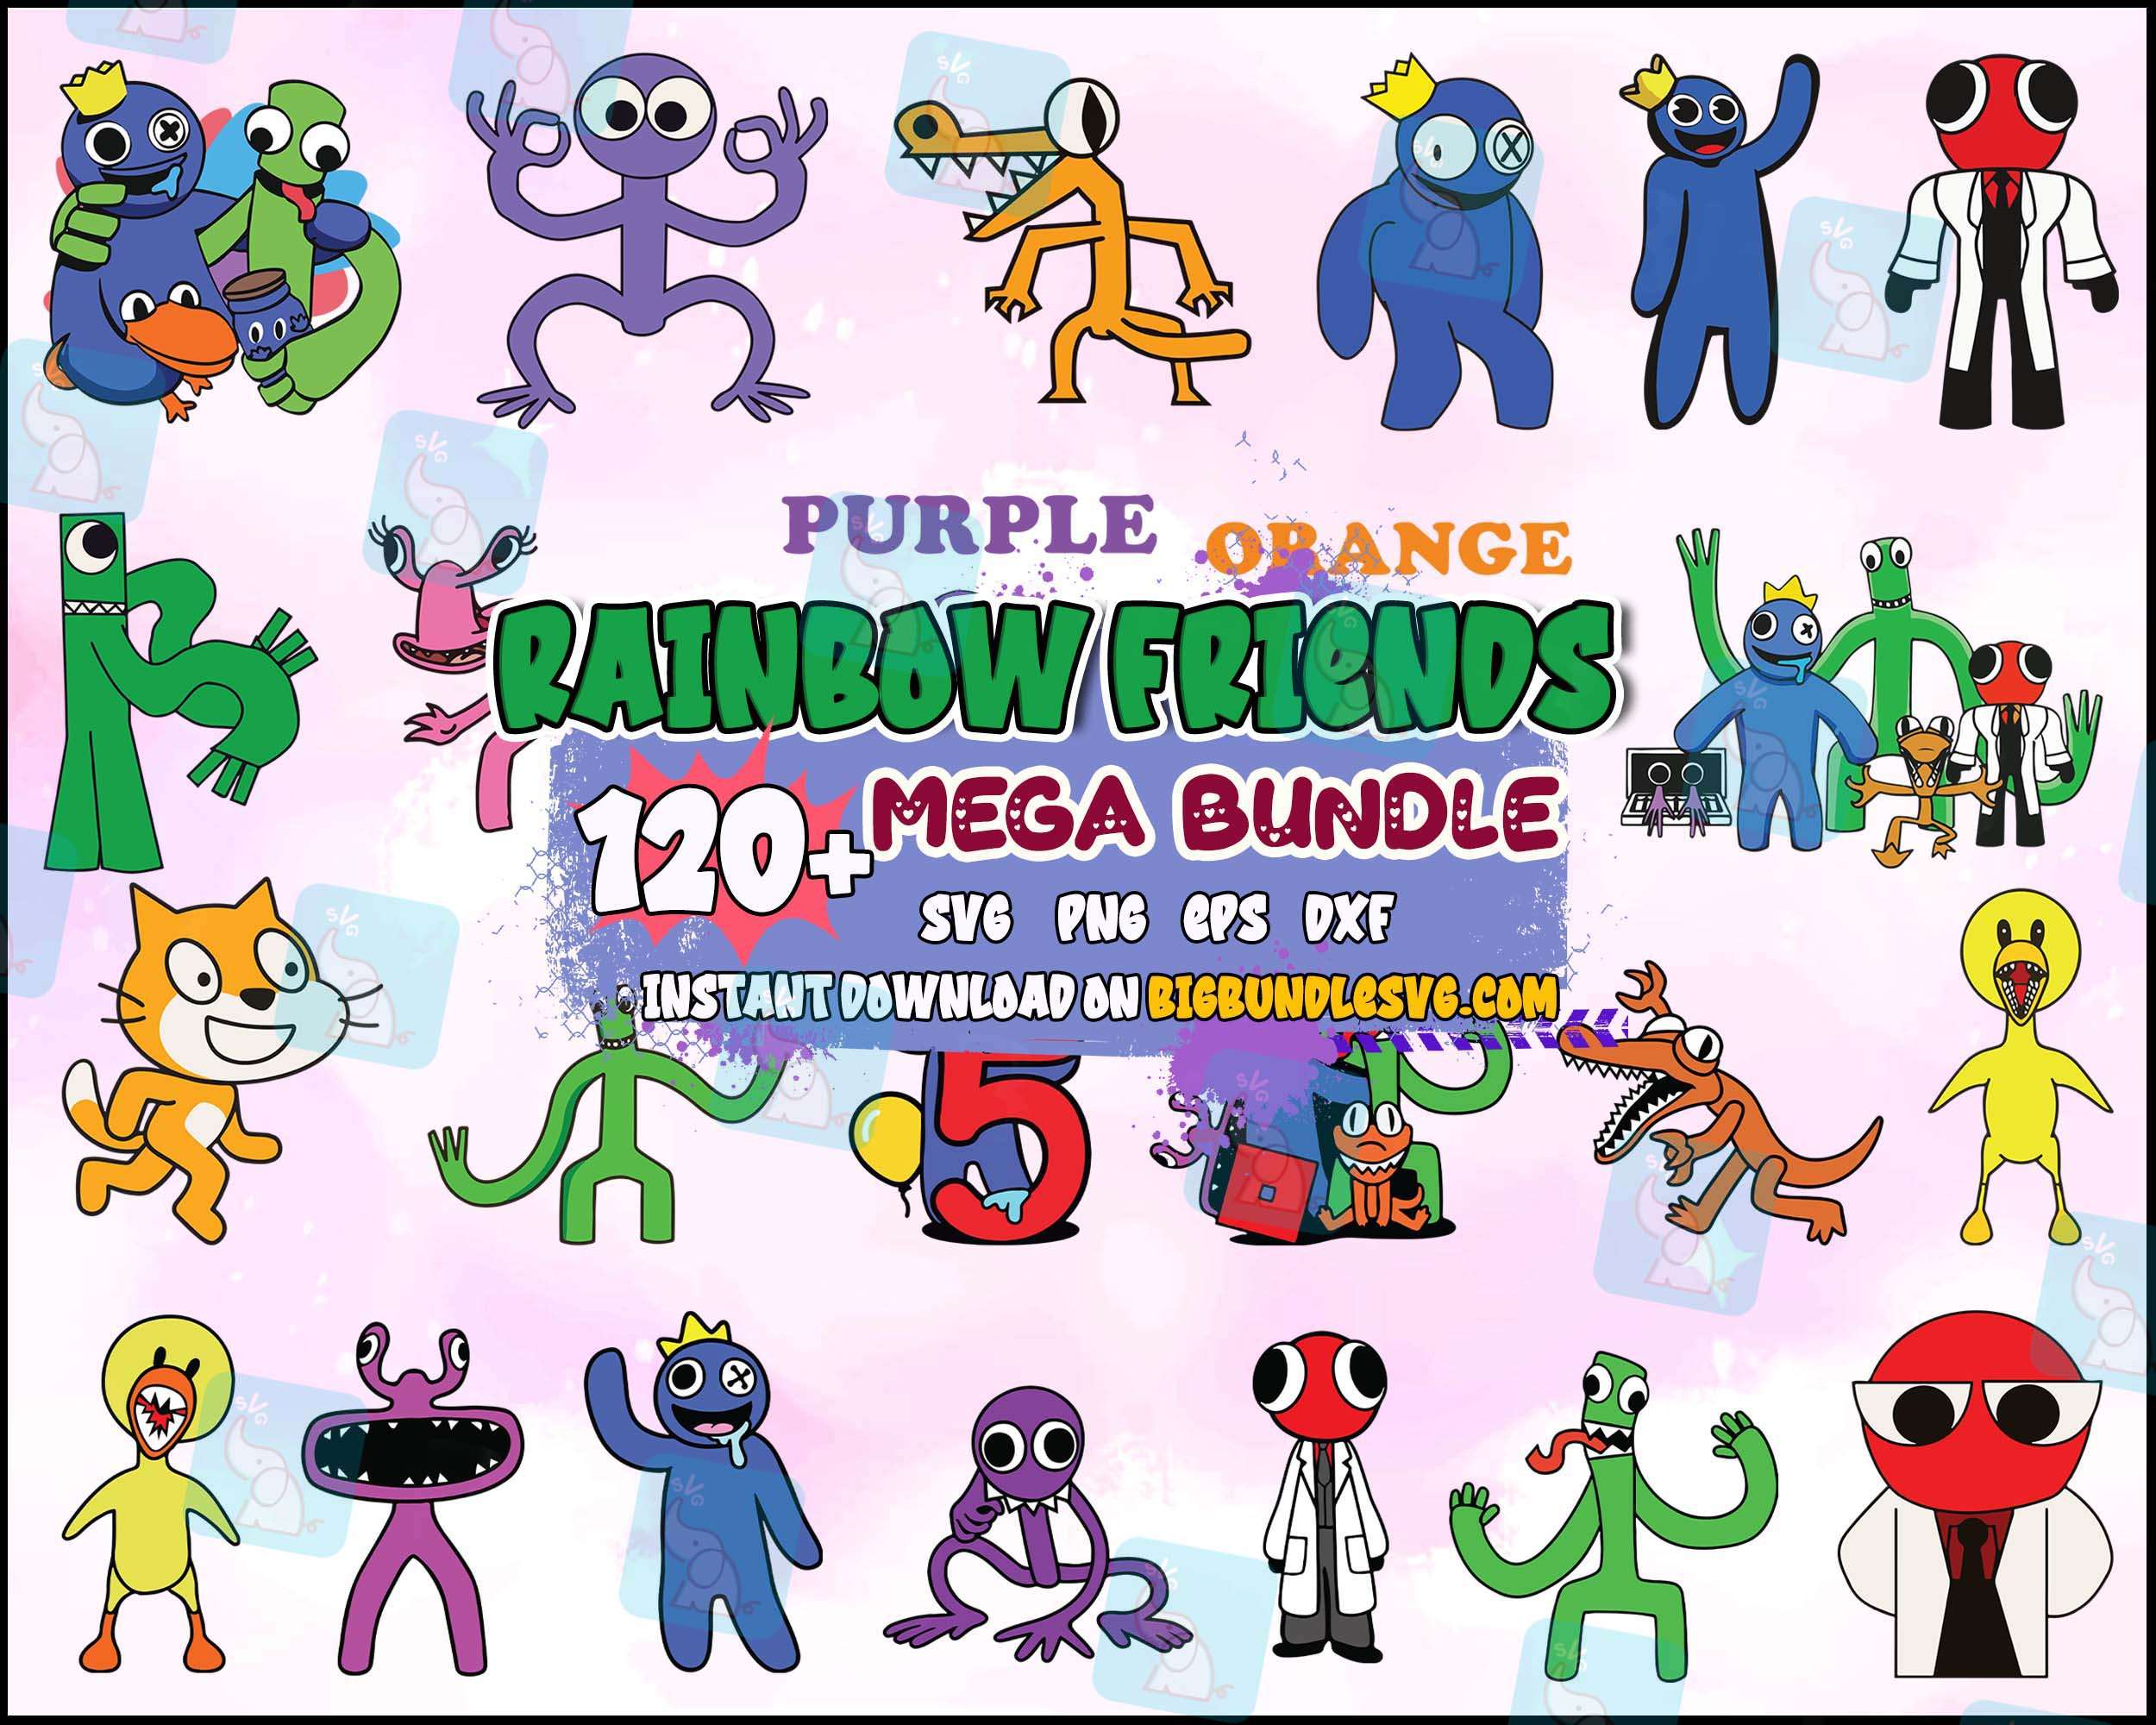 Buy Rainbow Friends Png Online in India 